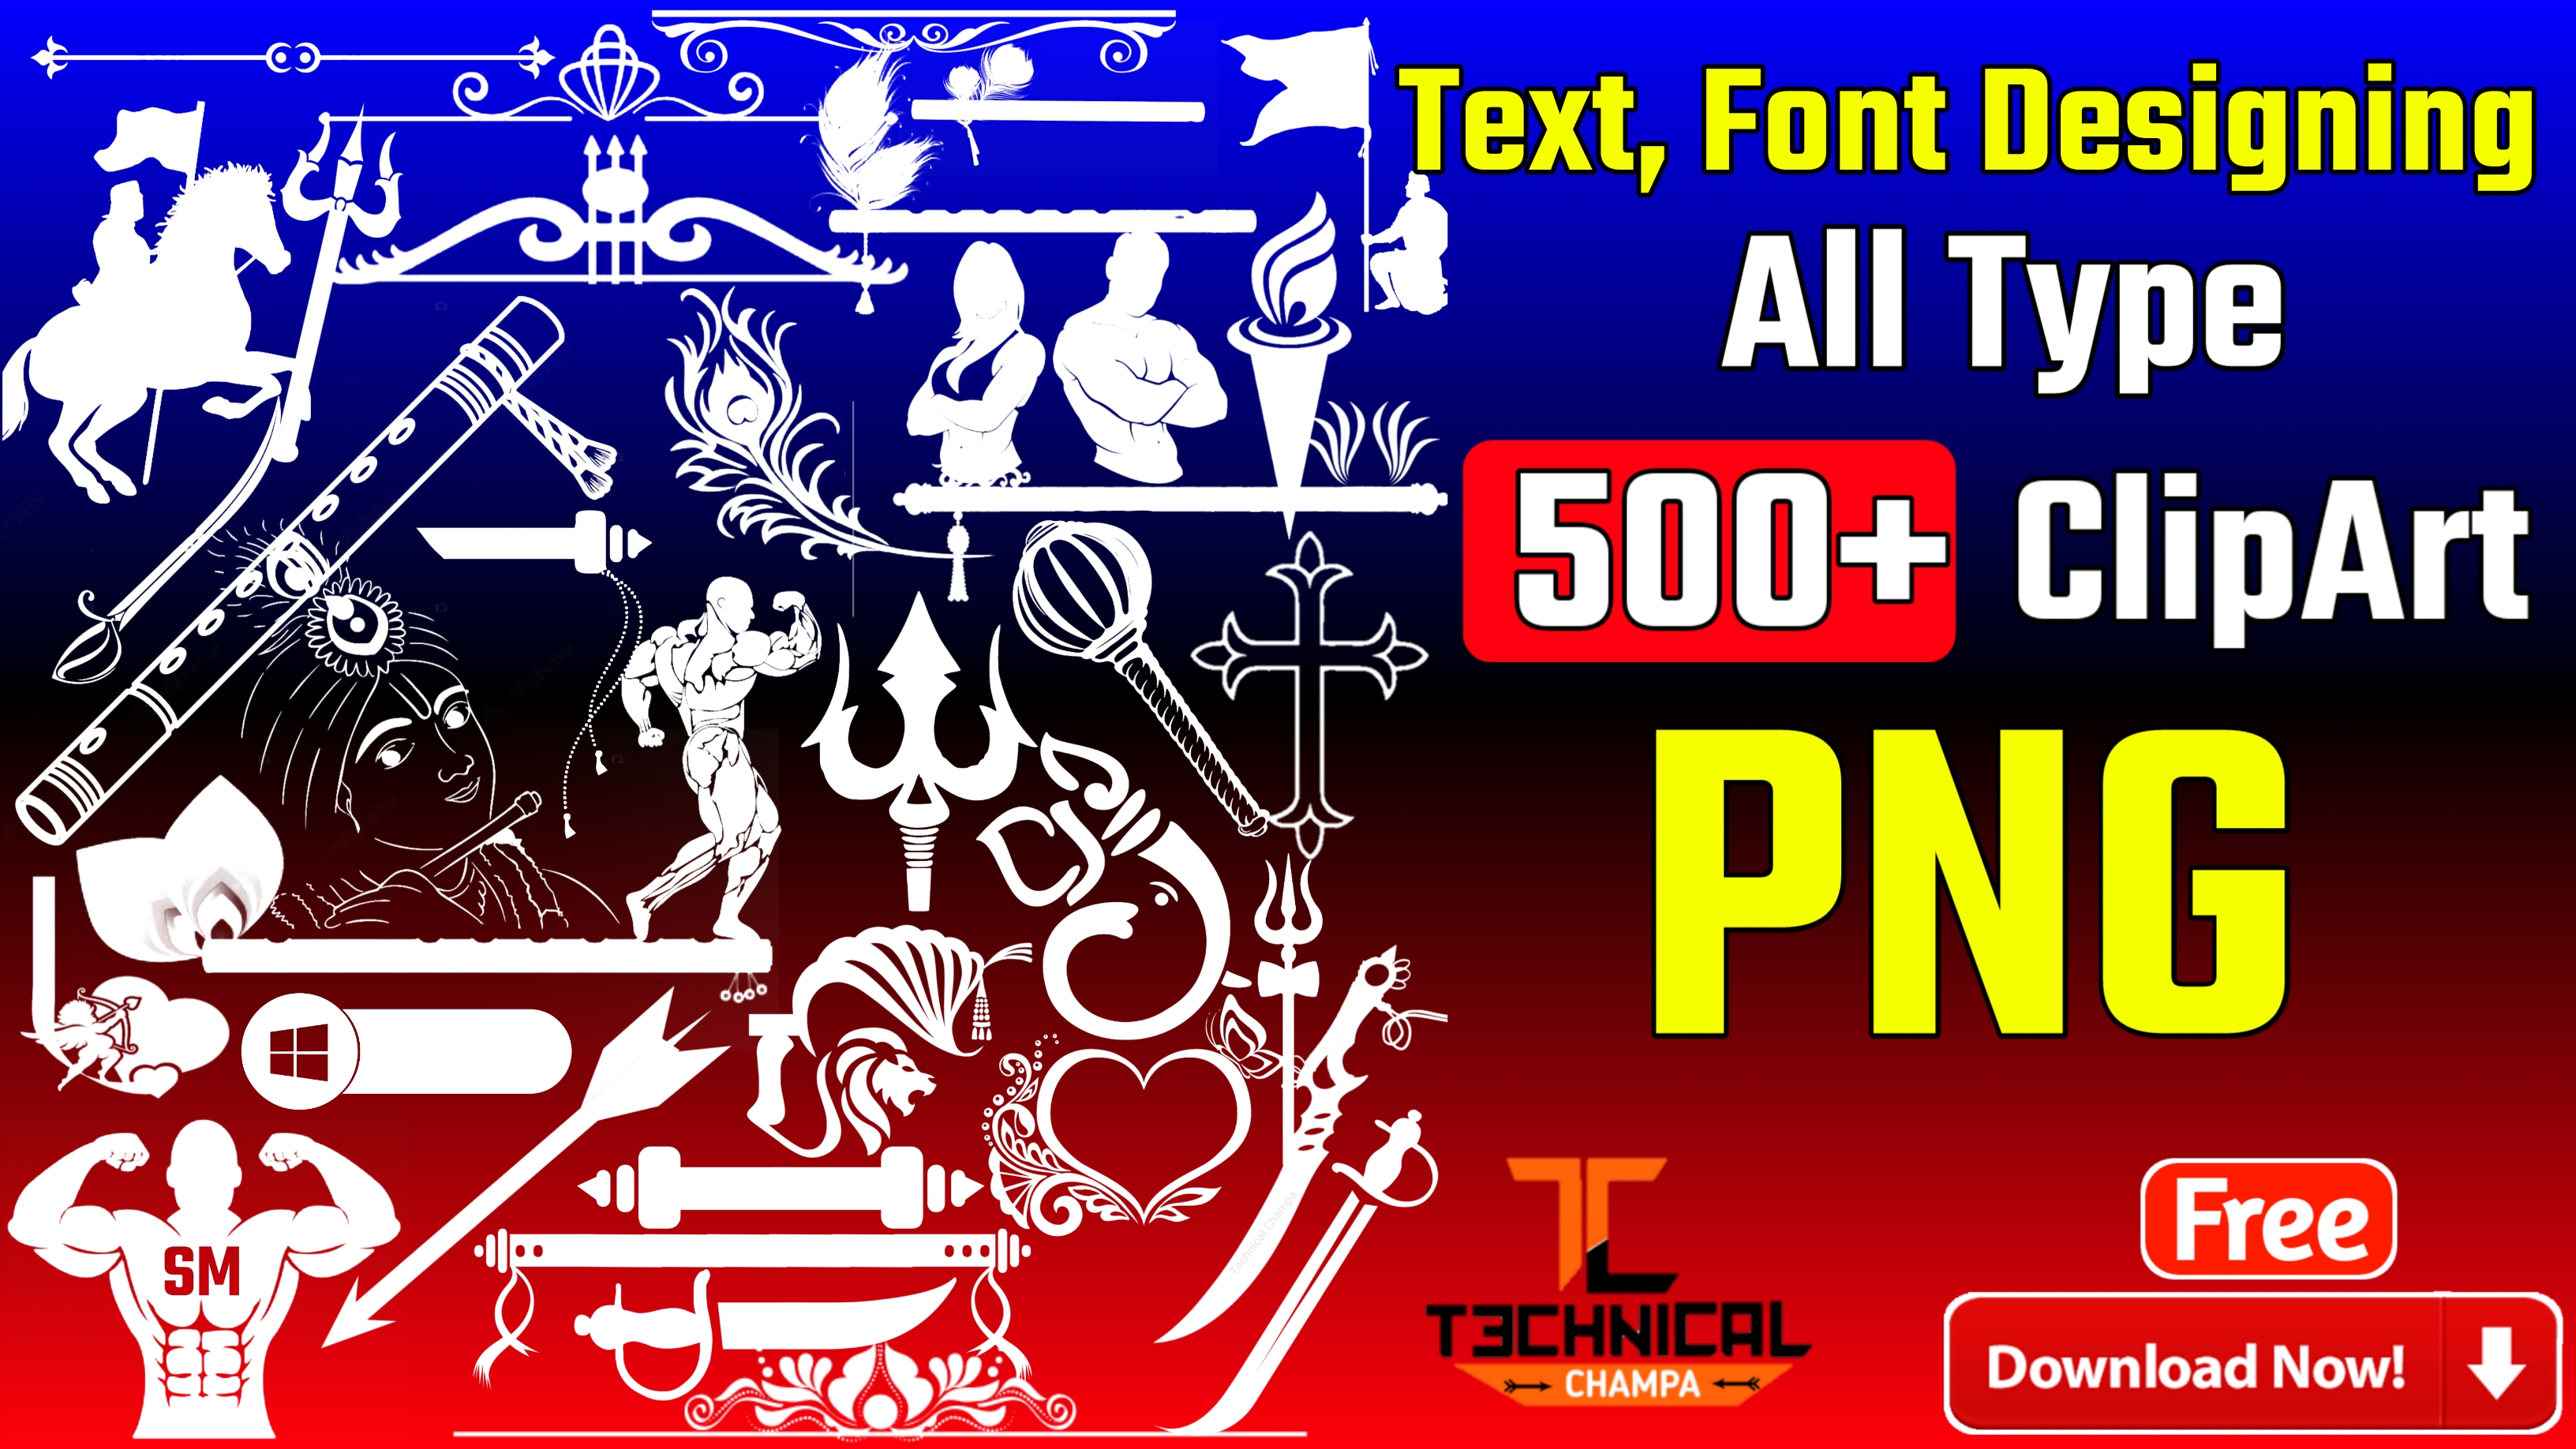 Text Designing All Type Clipart Png { Technical Champa } S M